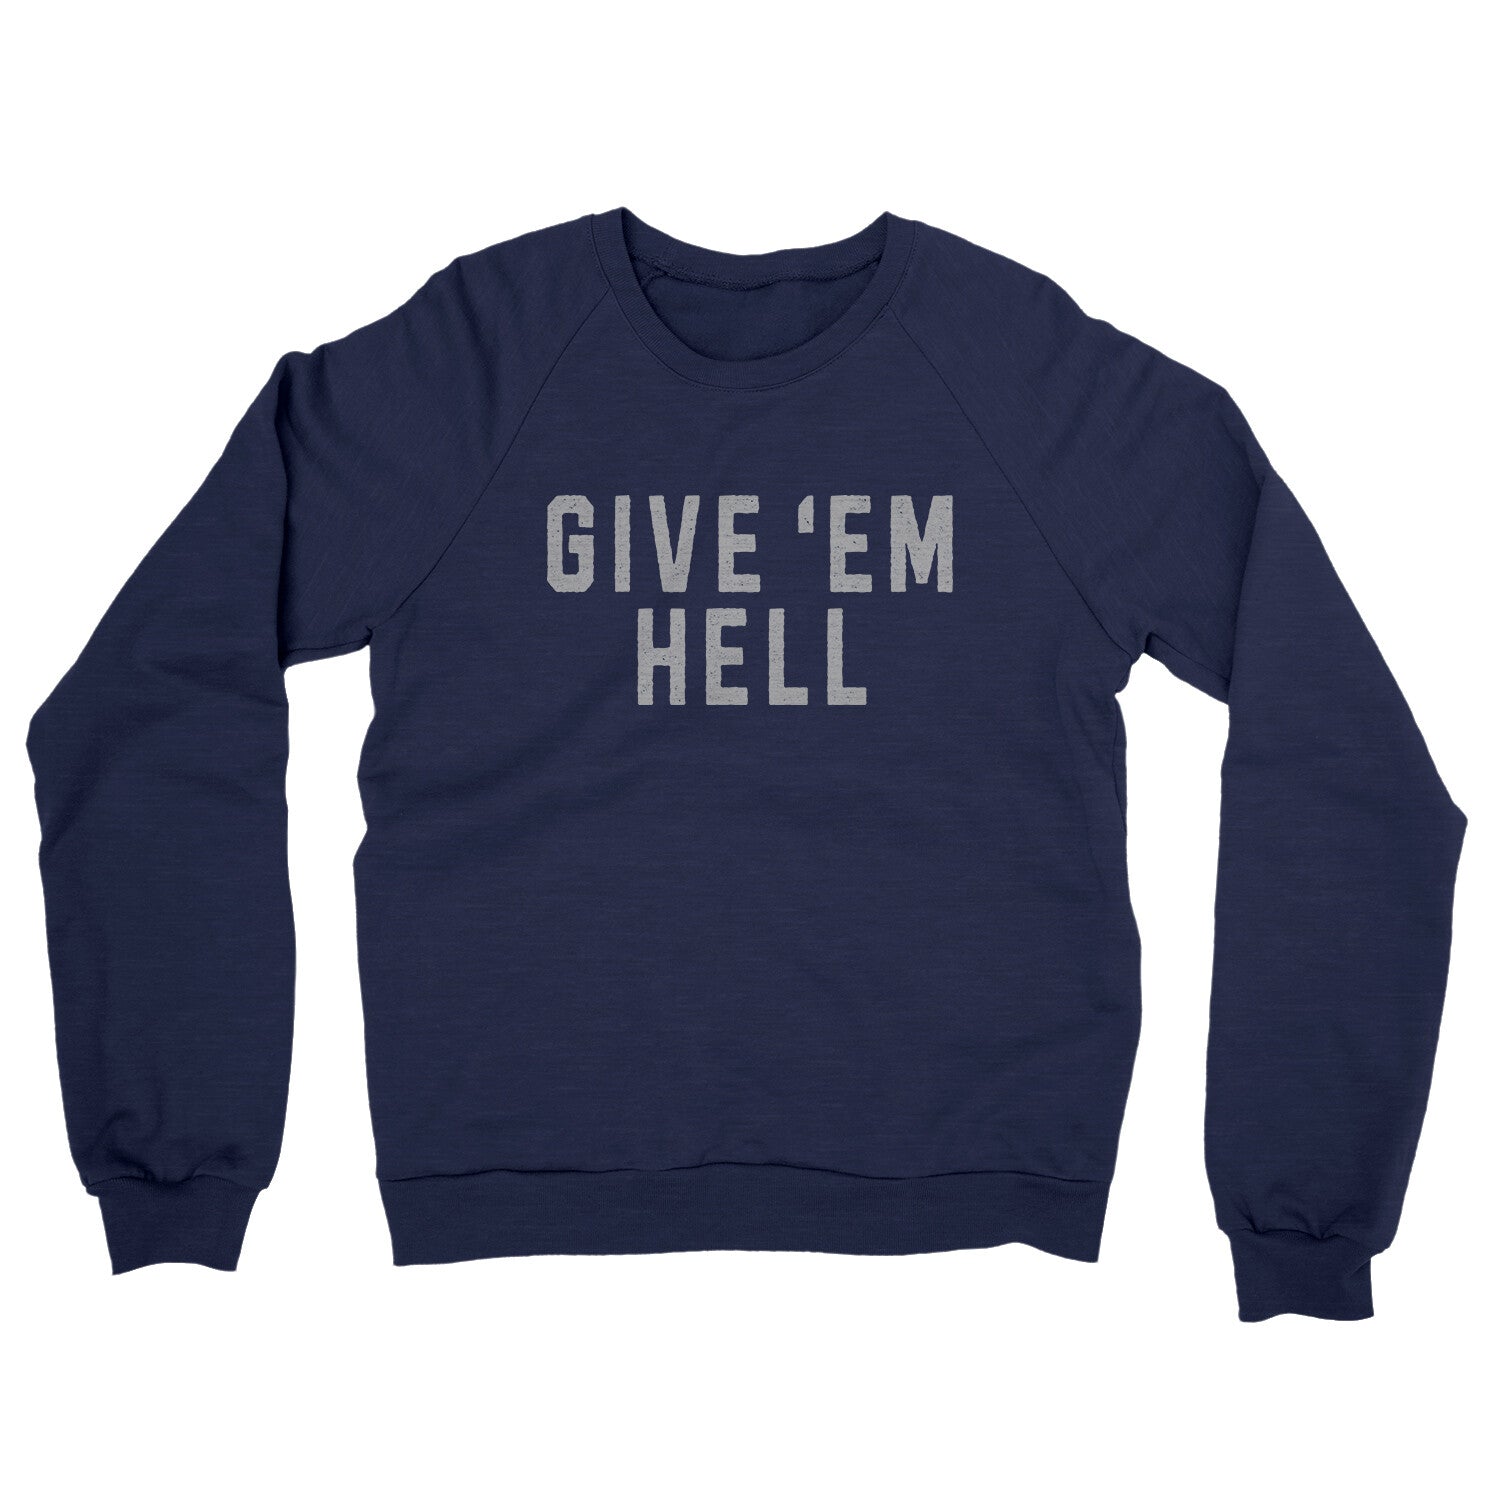 Give ‘em Hell in Navy Color